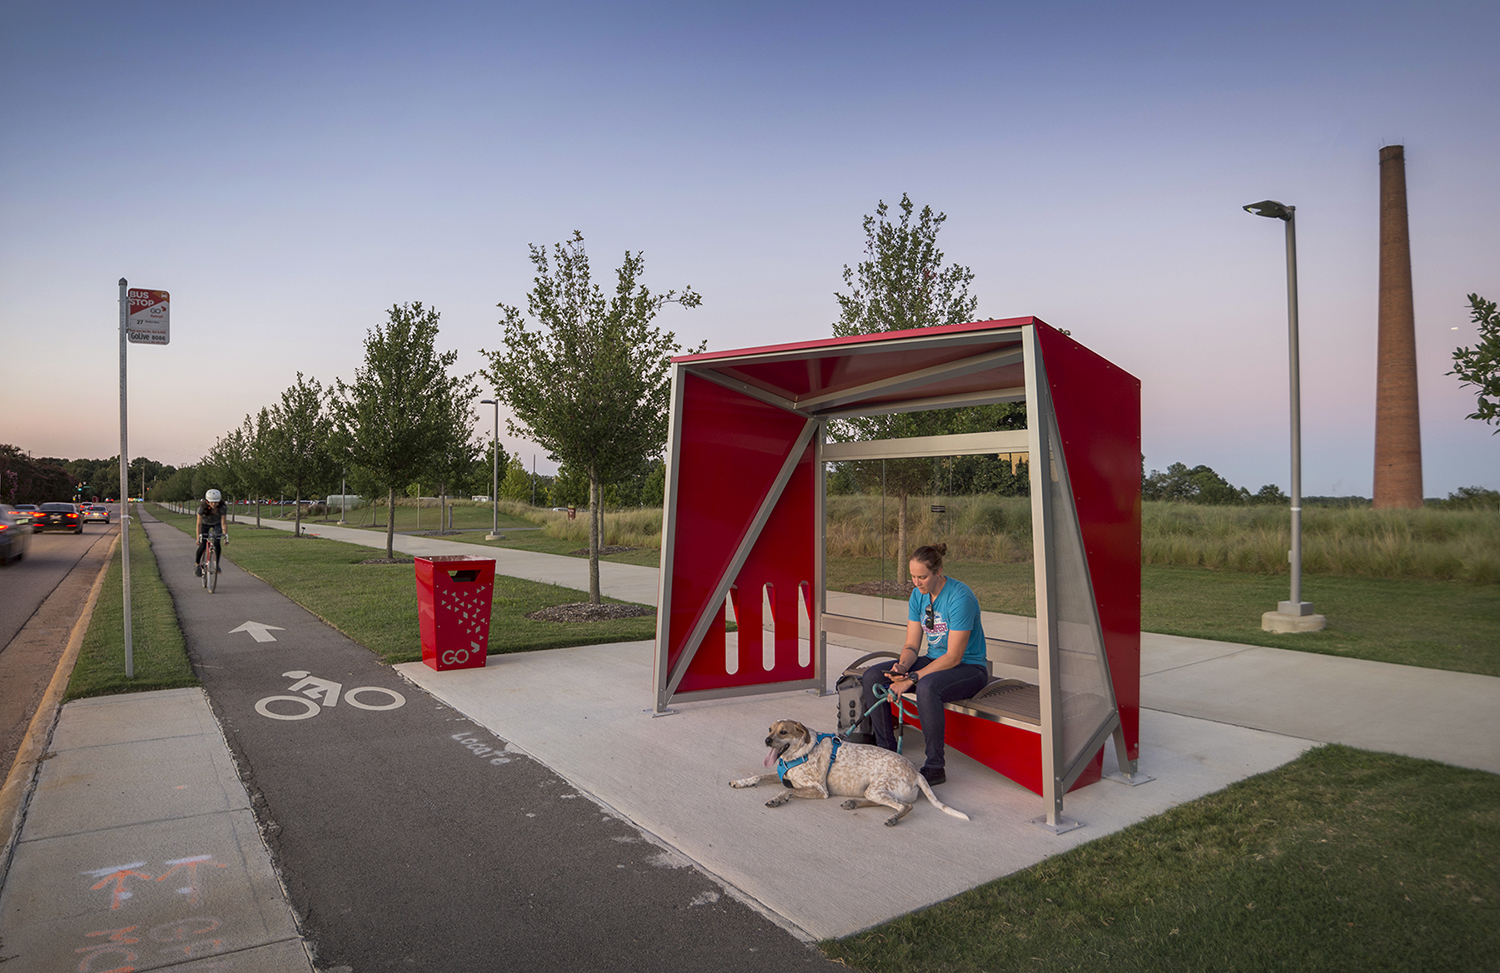 Man with dog waiting at red bus shelter at the museum